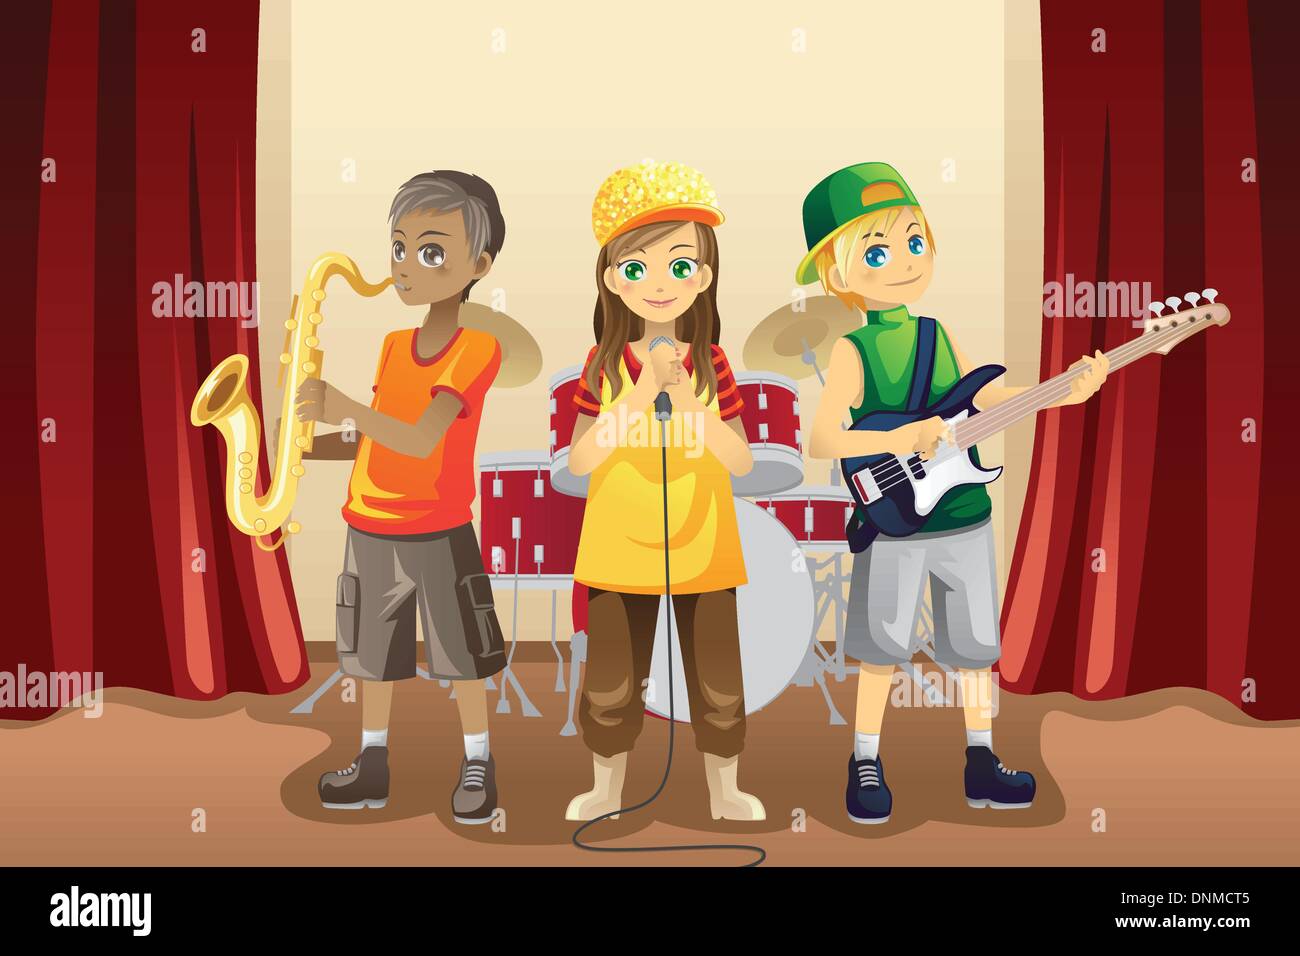 A vector illustration of little kids playing music in a music band Stock Vector